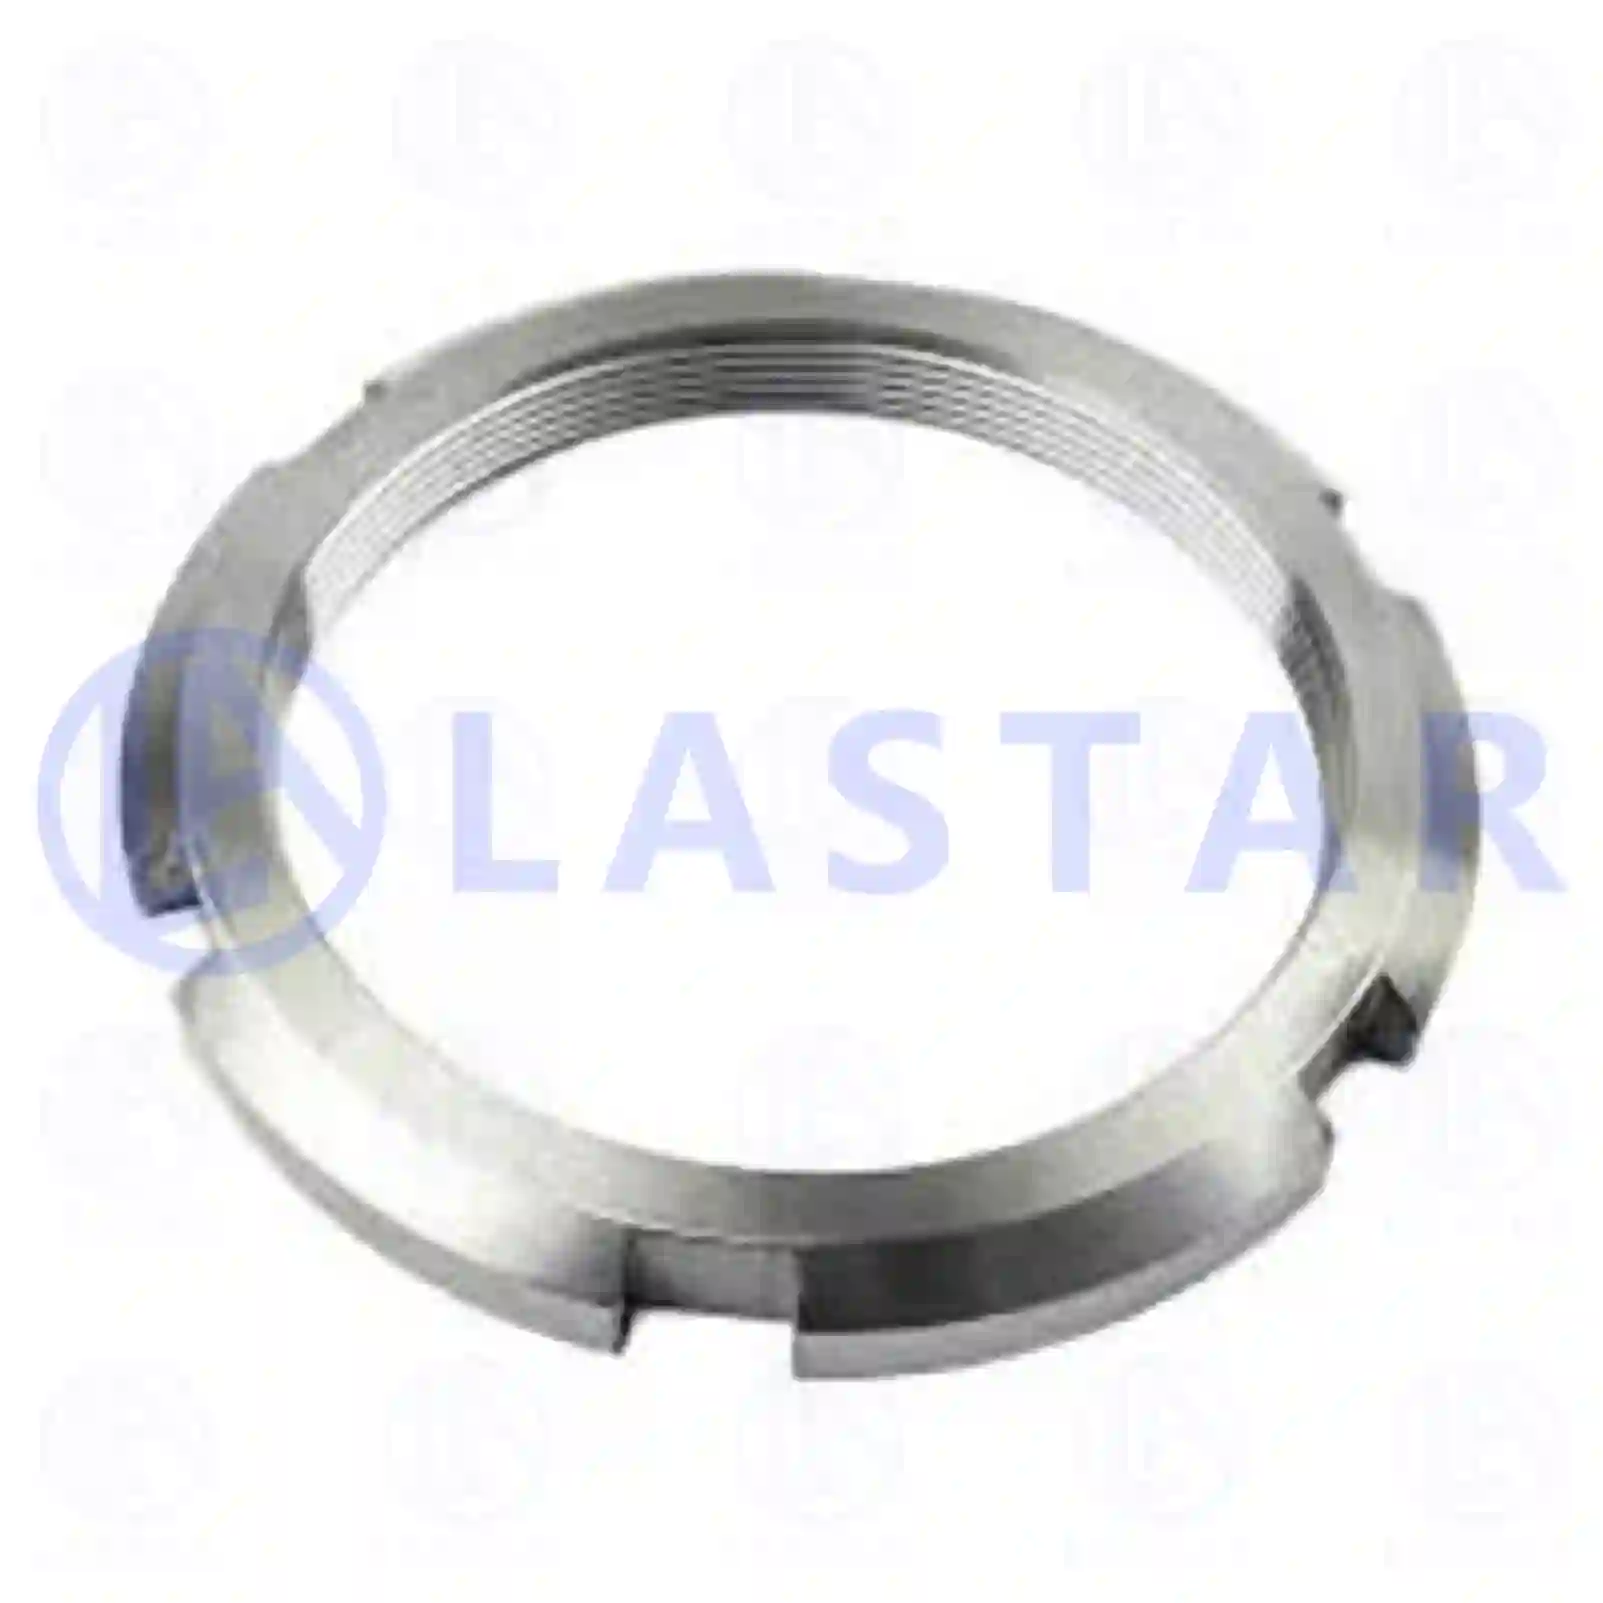 Grooved nut, 77730552, 9763560026, 9763560026, ZG30042-0008 ||  77730552 Lastar Spare Part | Truck Spare Parts, Auotomotive Spare Parts Grooved nut, 77730552, 9763560026, 9763560026, ZG30042-0008 ||  77730552 Lastar Spare Part | Truck Spare Parts, Auotomotive Spare Parts